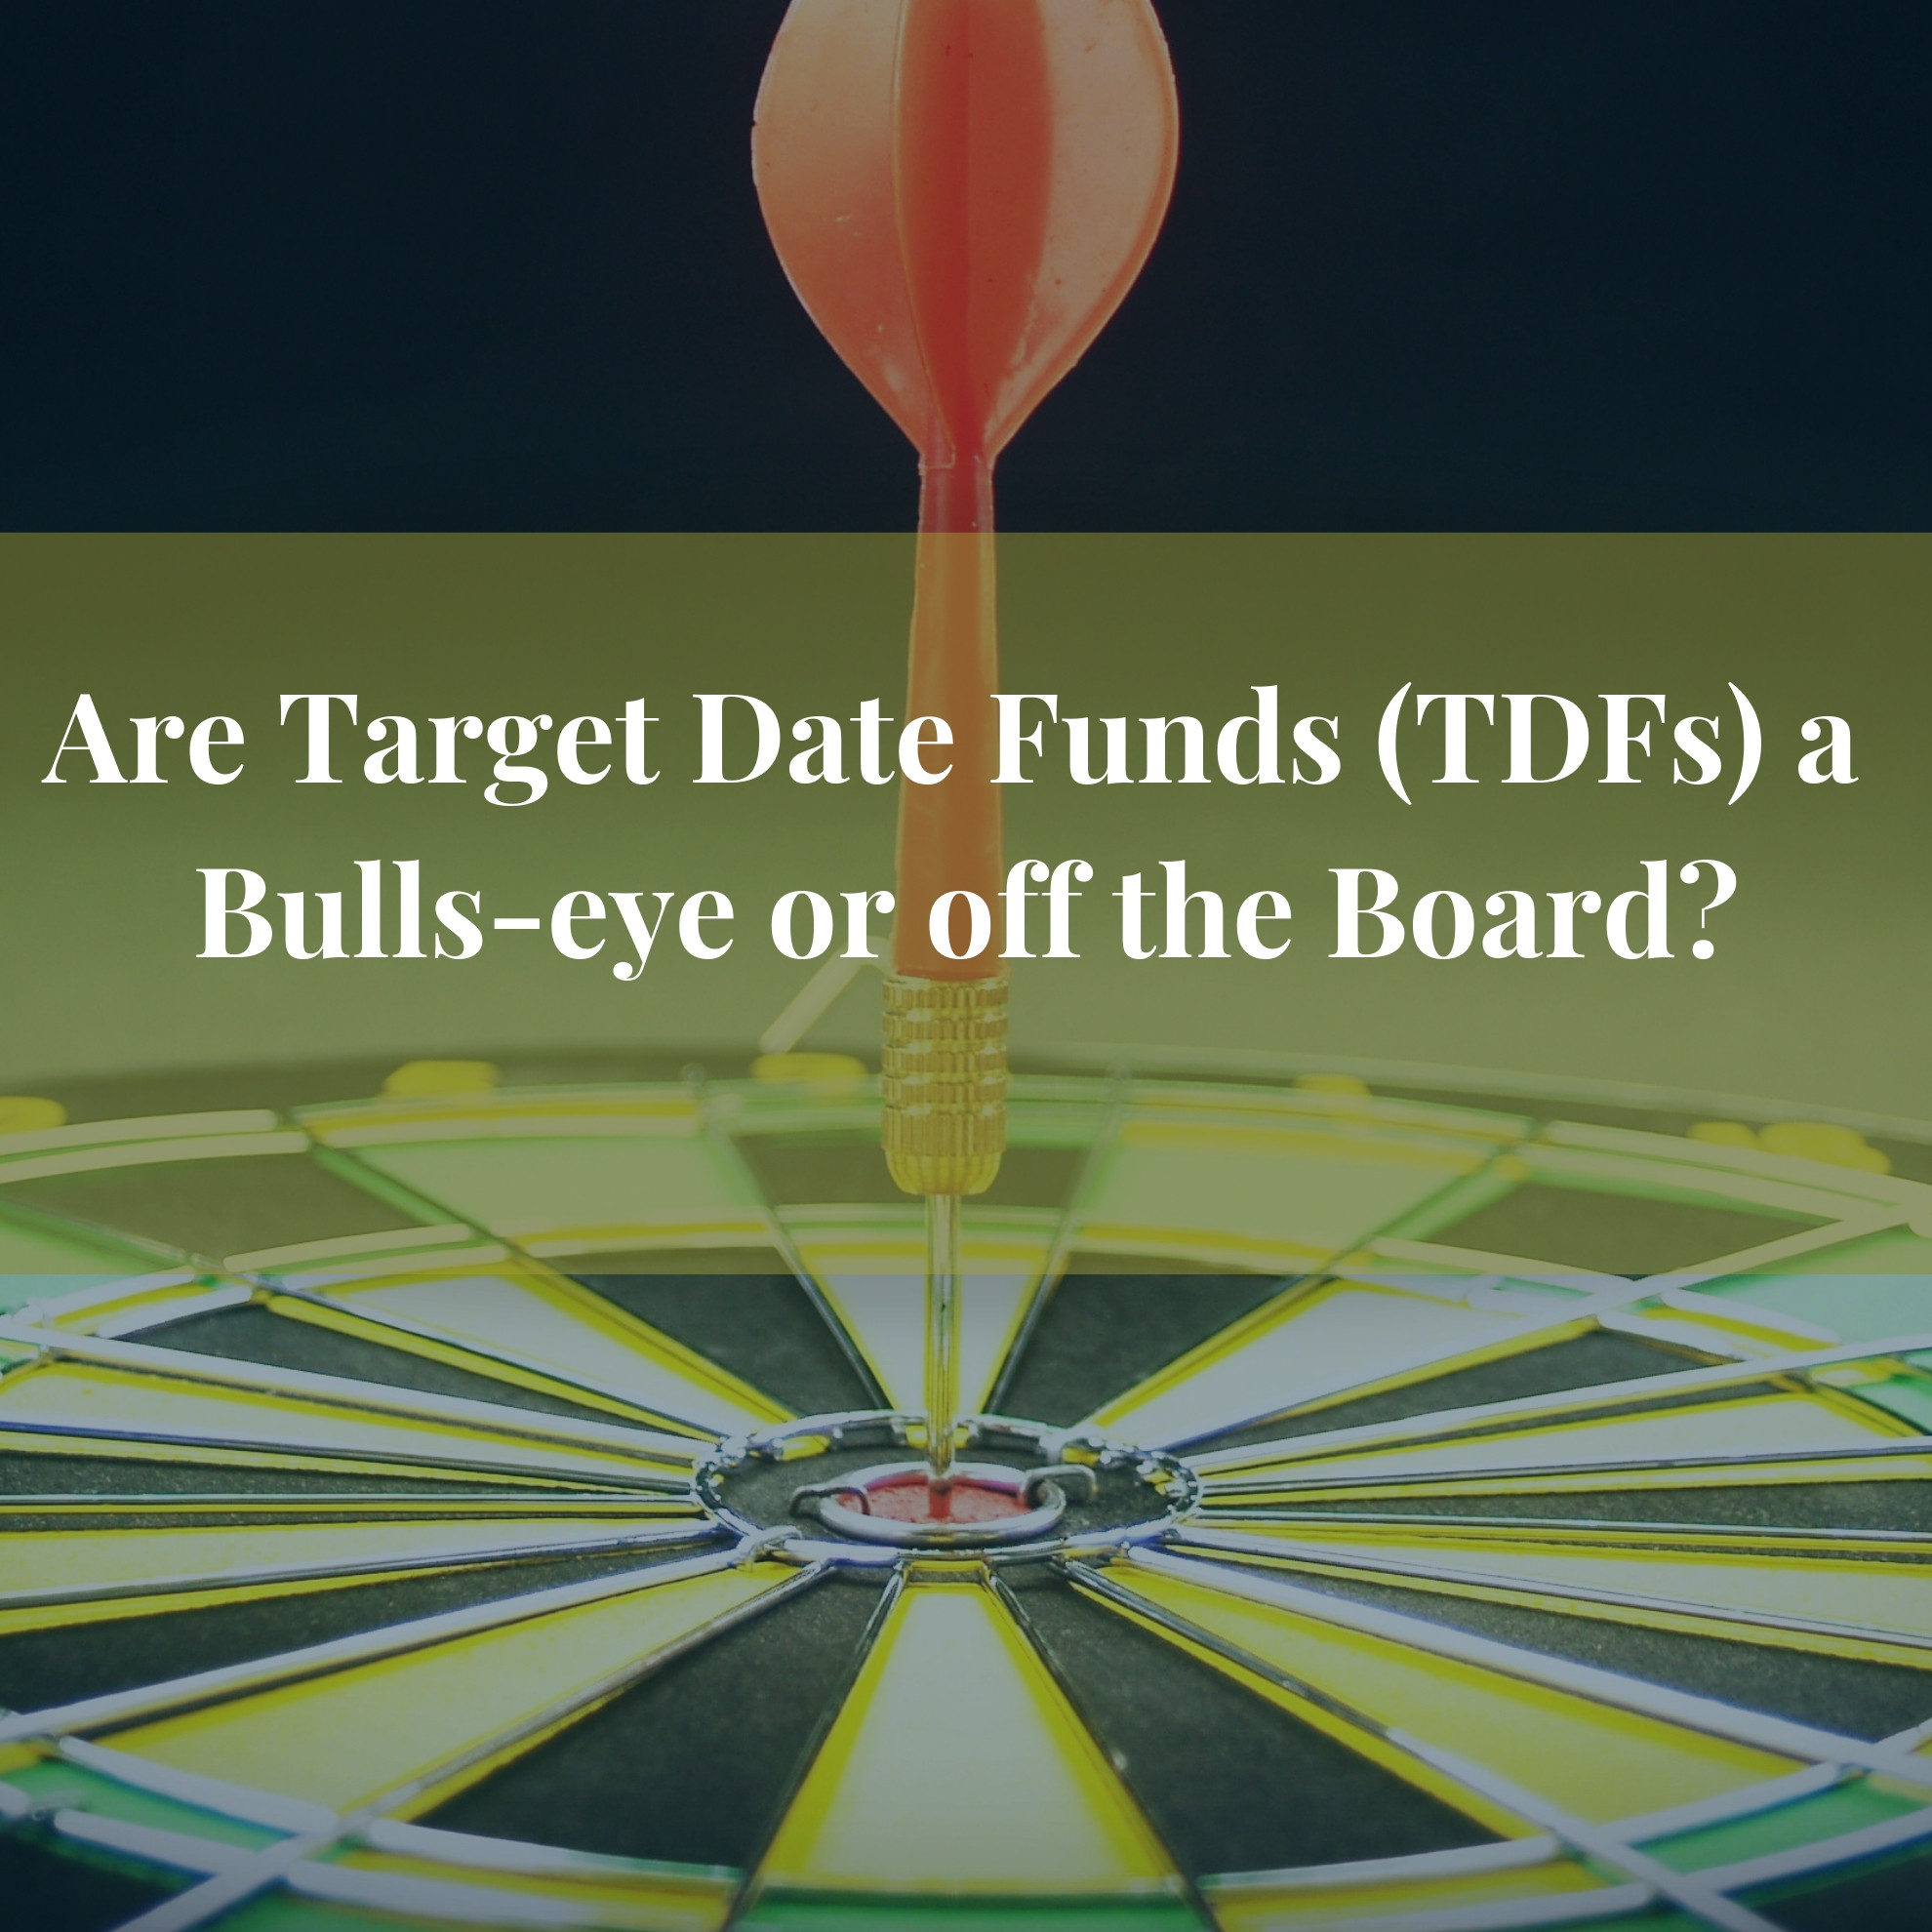 Are Target Date Funds a Bulls-eye or off the Board?